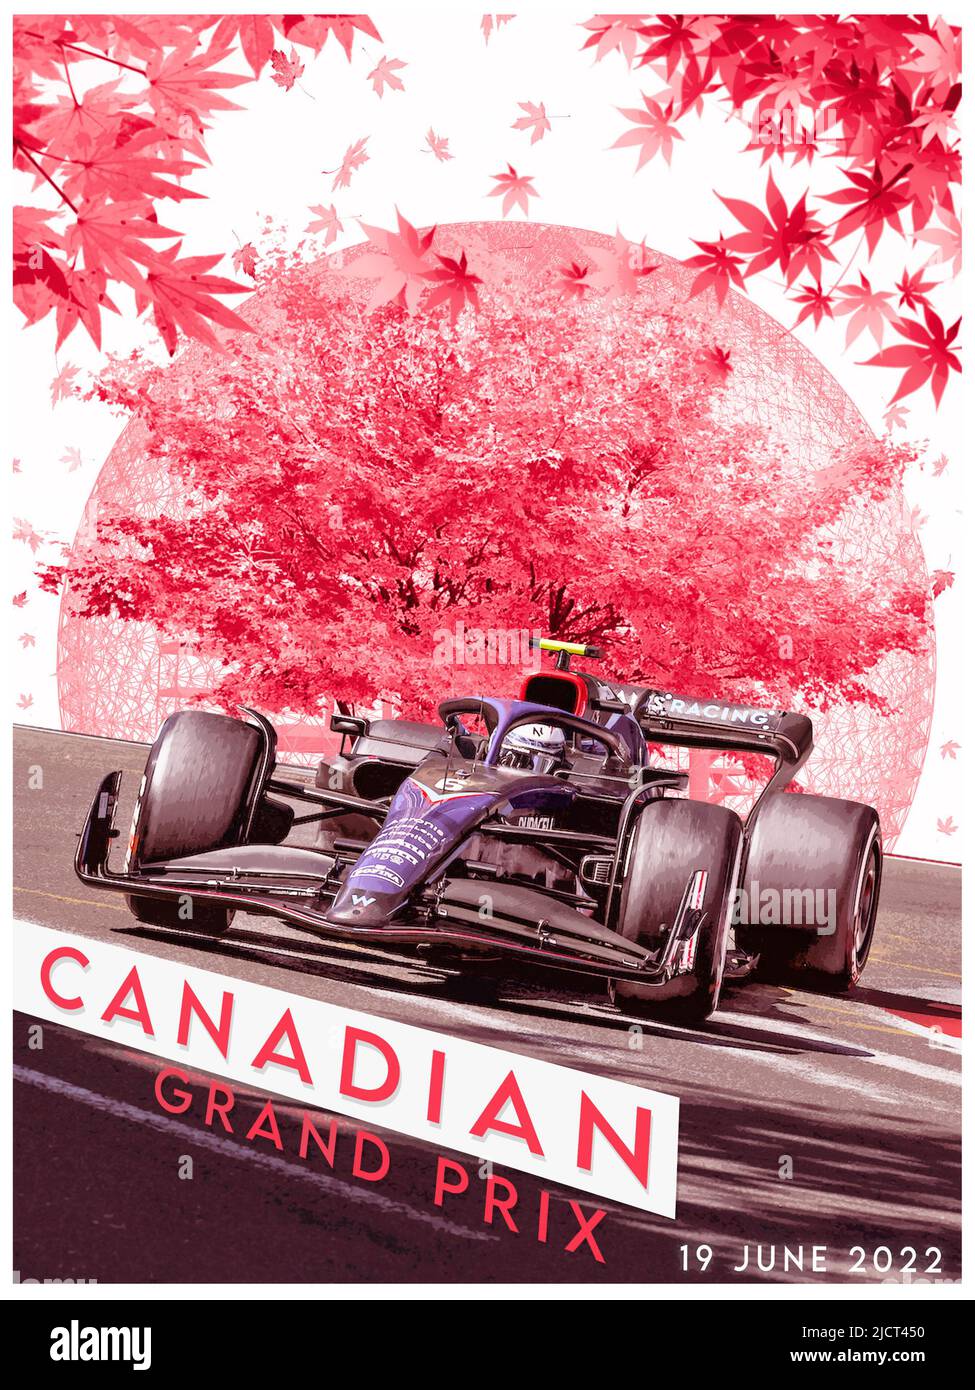 Canadian F1 Grand Prix 2022 Race Poster Stock Photo